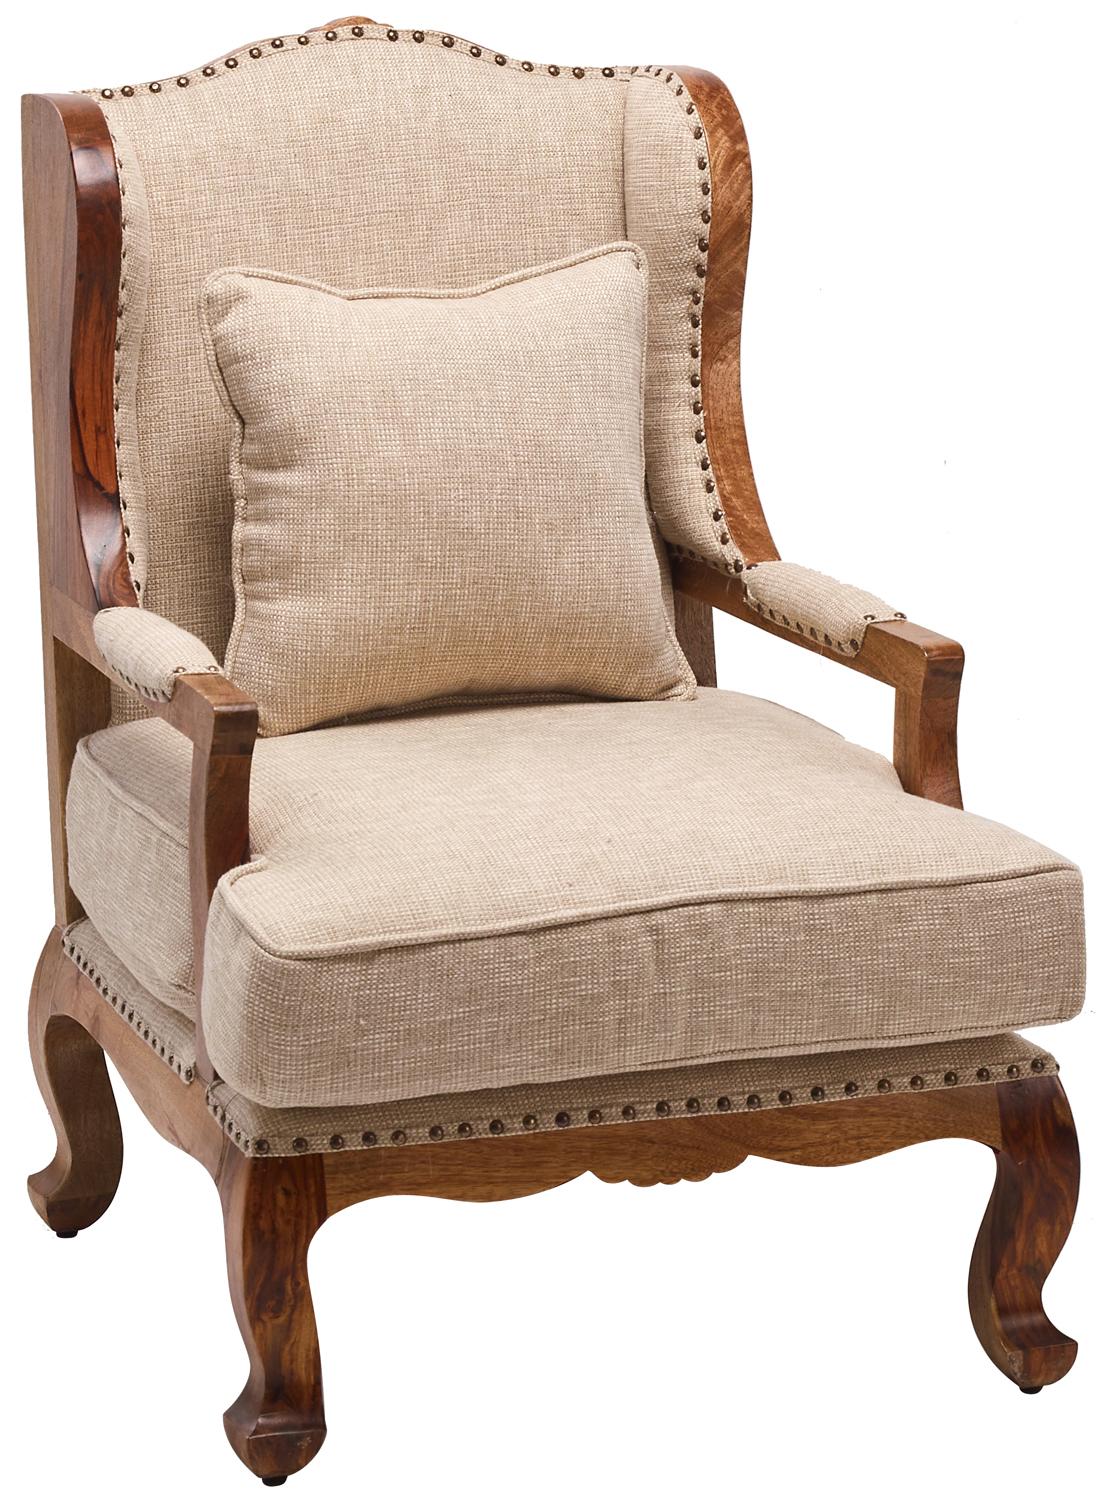 Traditional Chair CAC-81140 Emery CAC-81140 in Chestnut, Beige Cotton